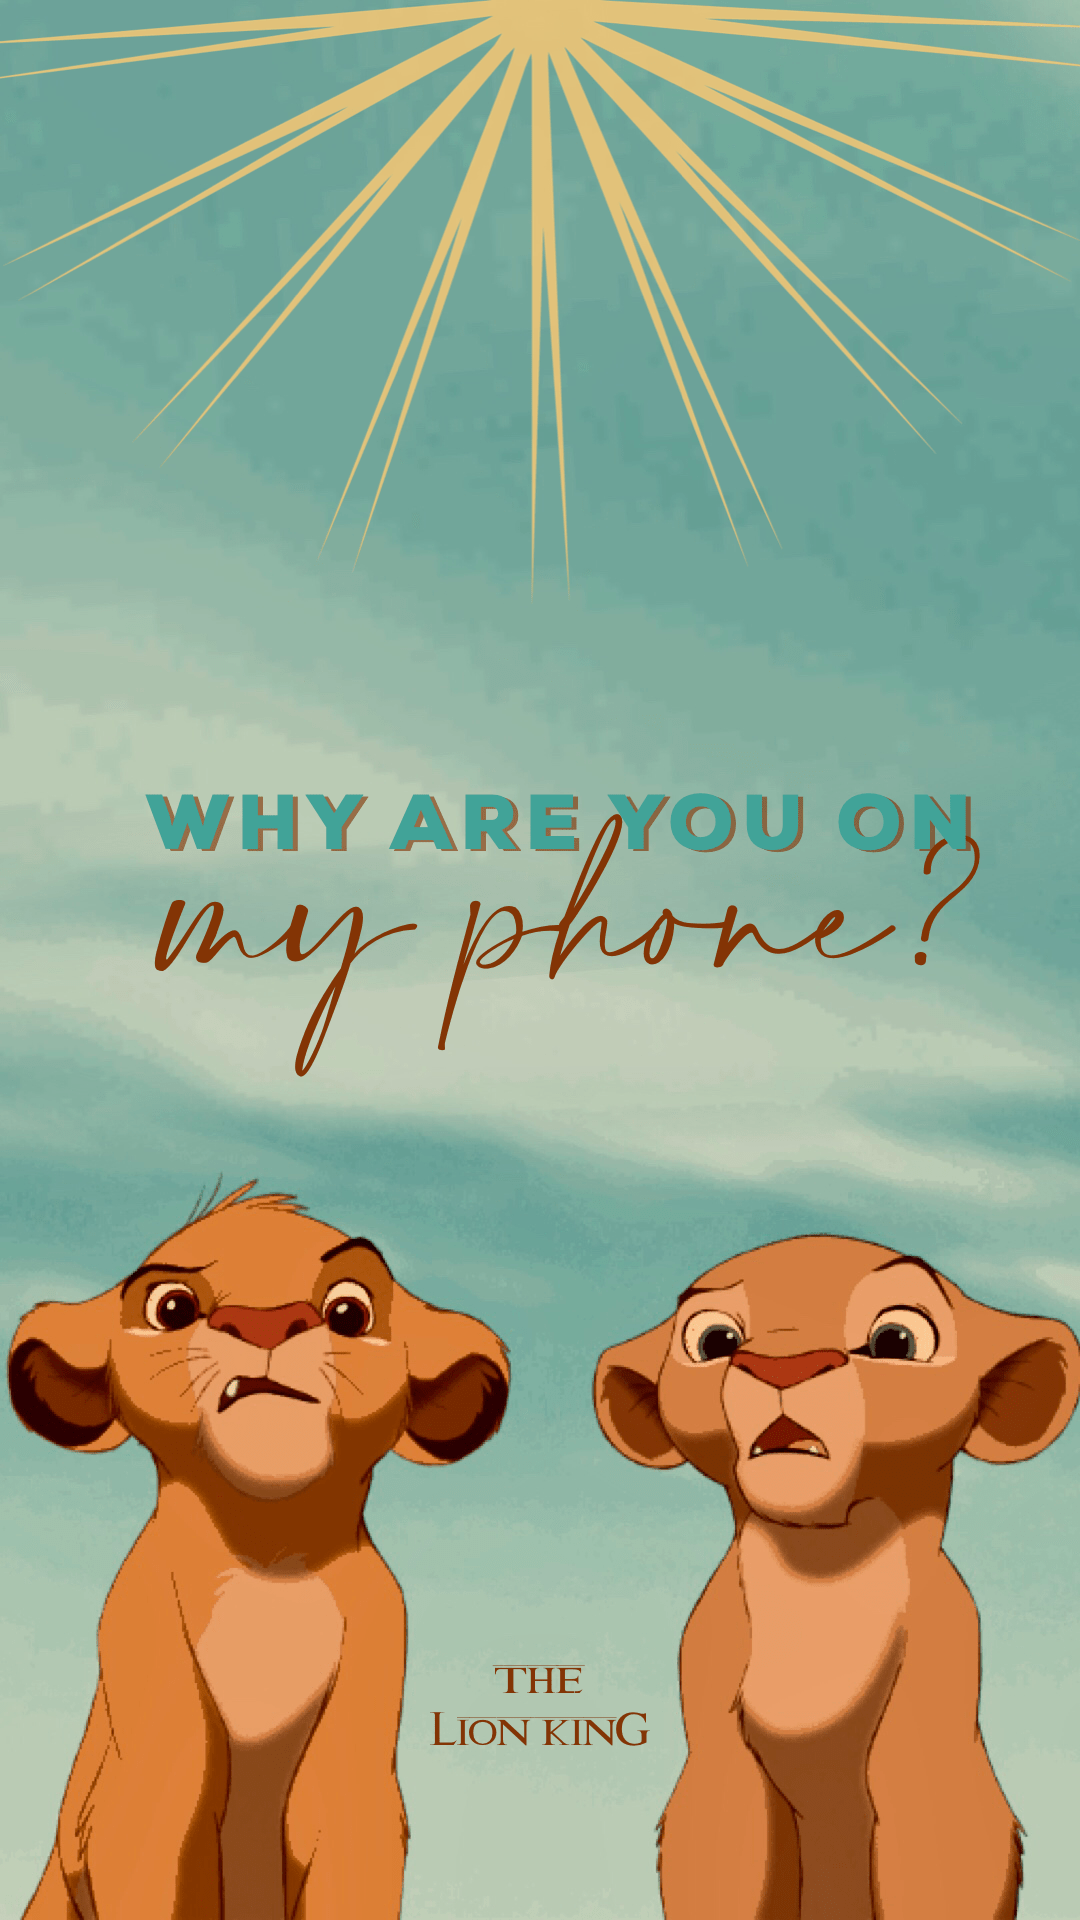 The lion king why are you on my phone - The Lion King